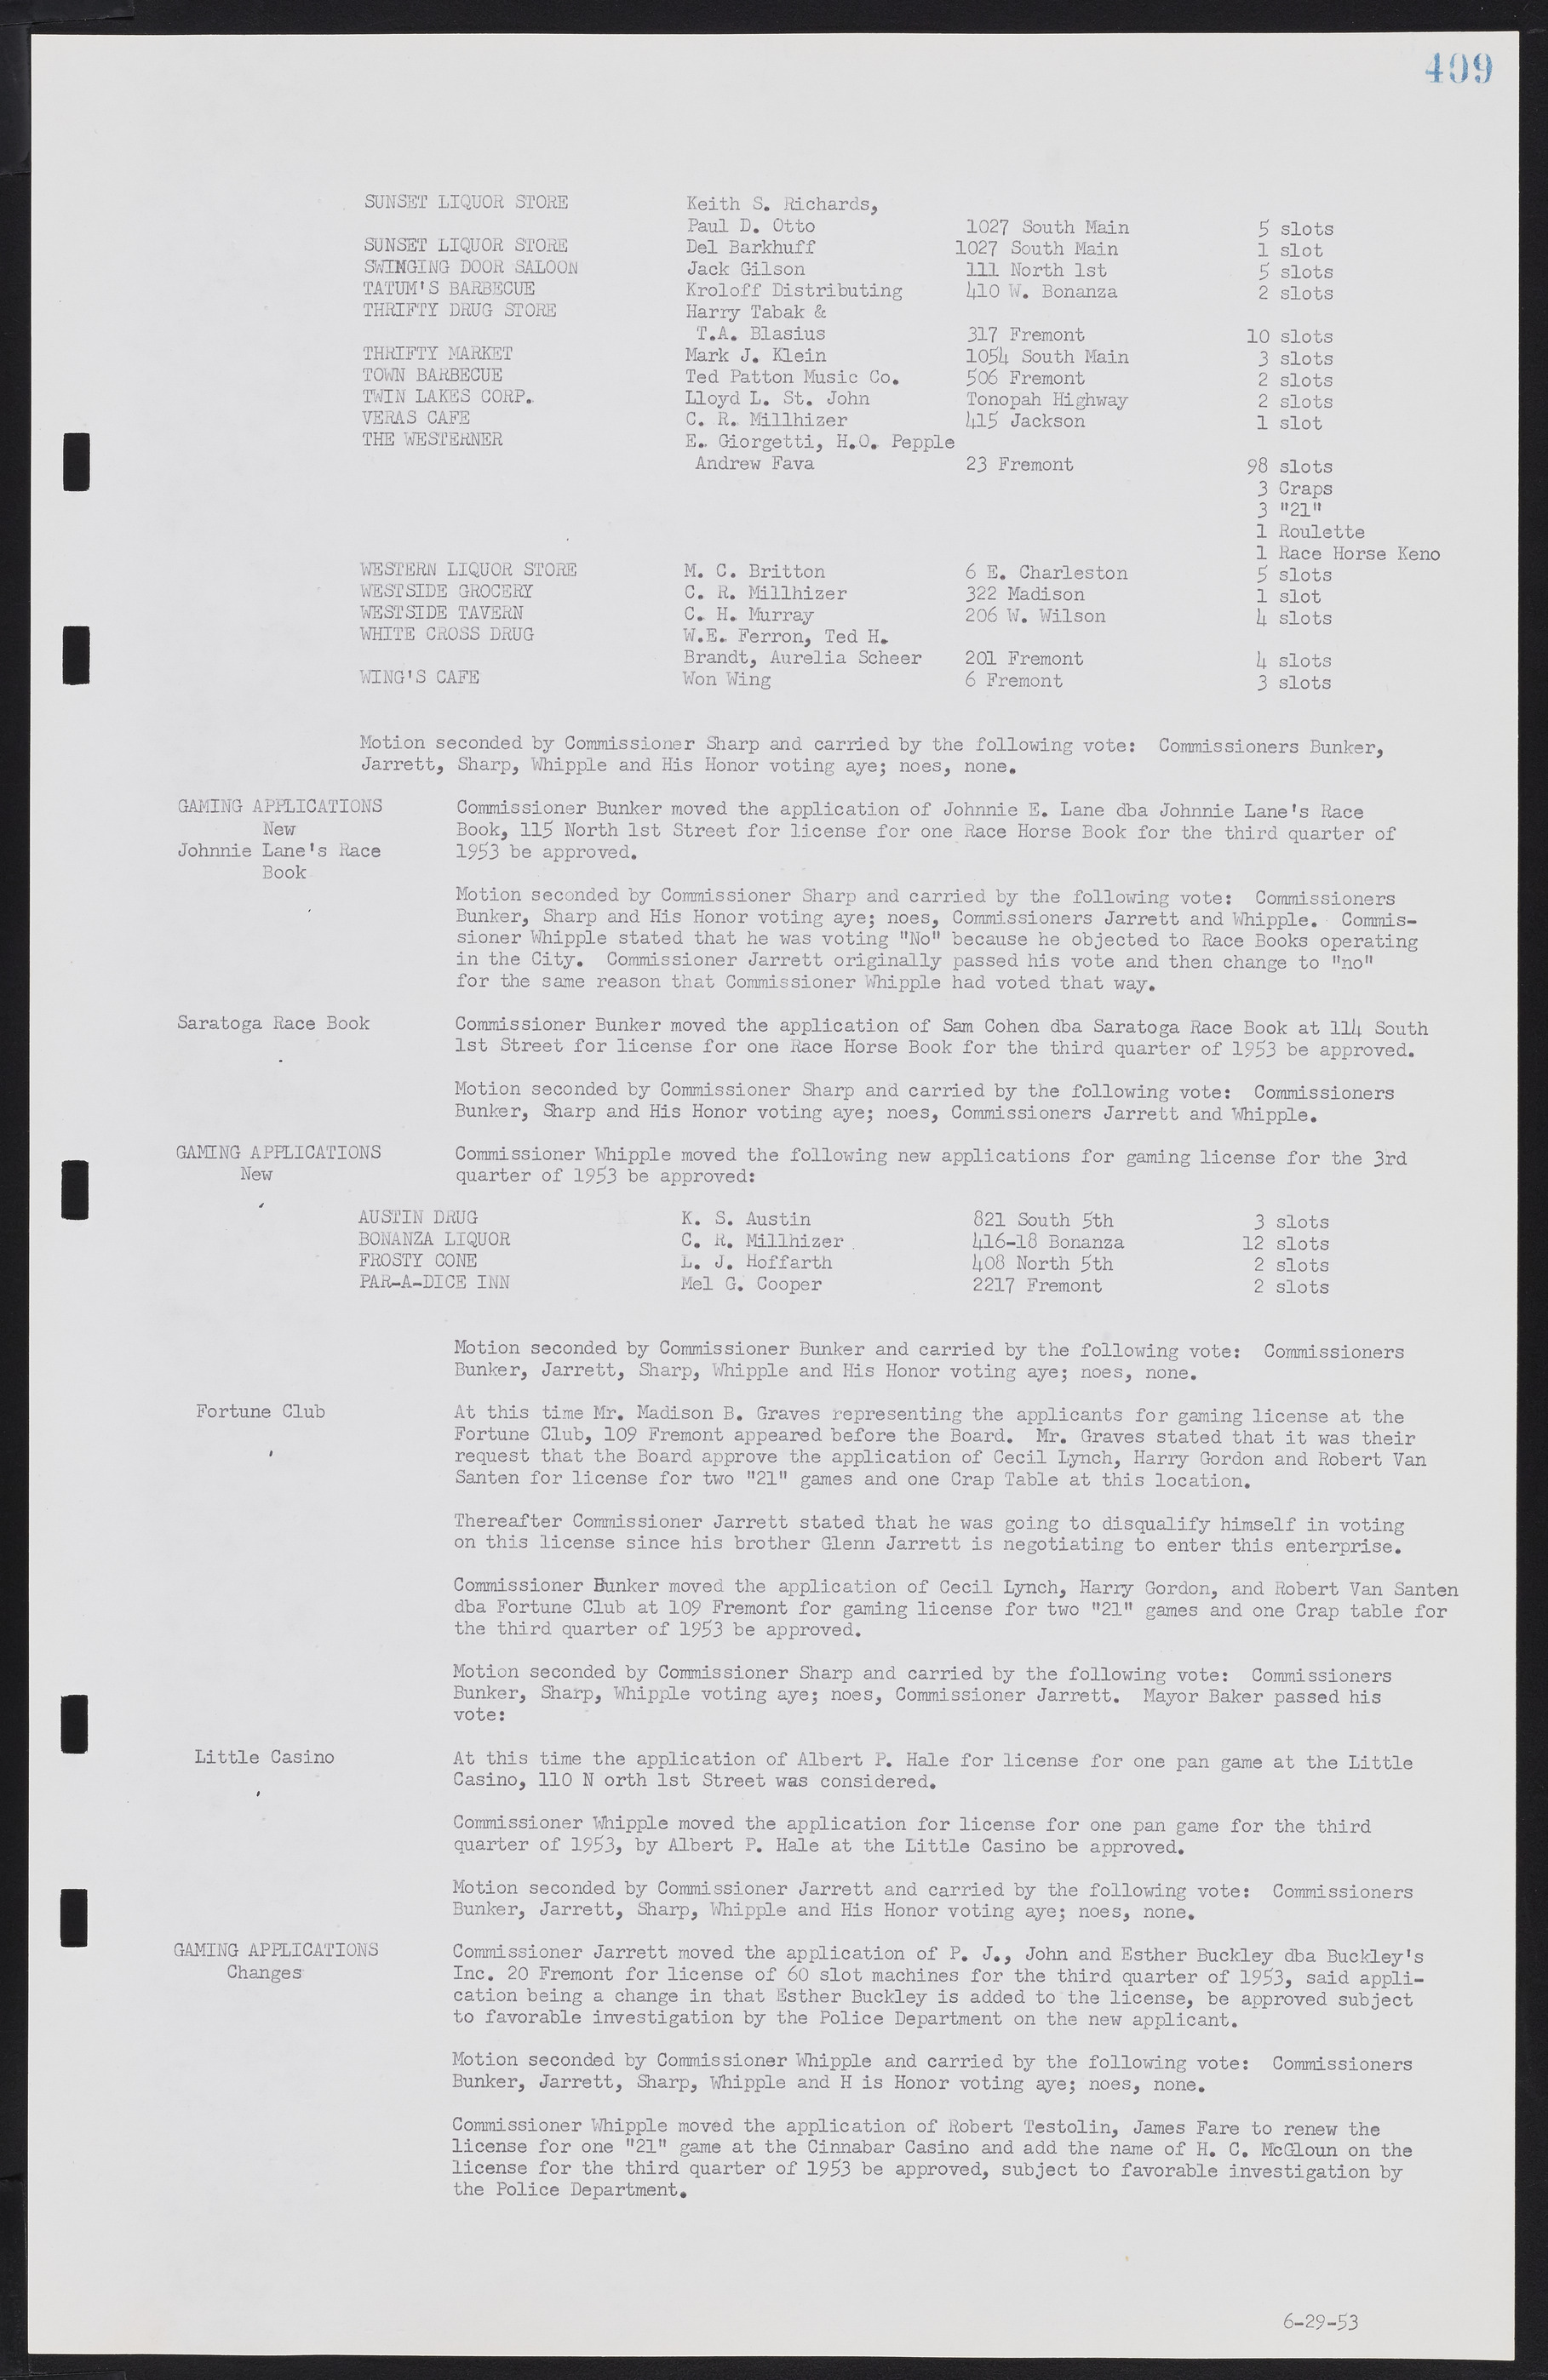 Las Vegas City Commission Minutes, May 26, 1952 to February 17, 1954, lvc000008-437